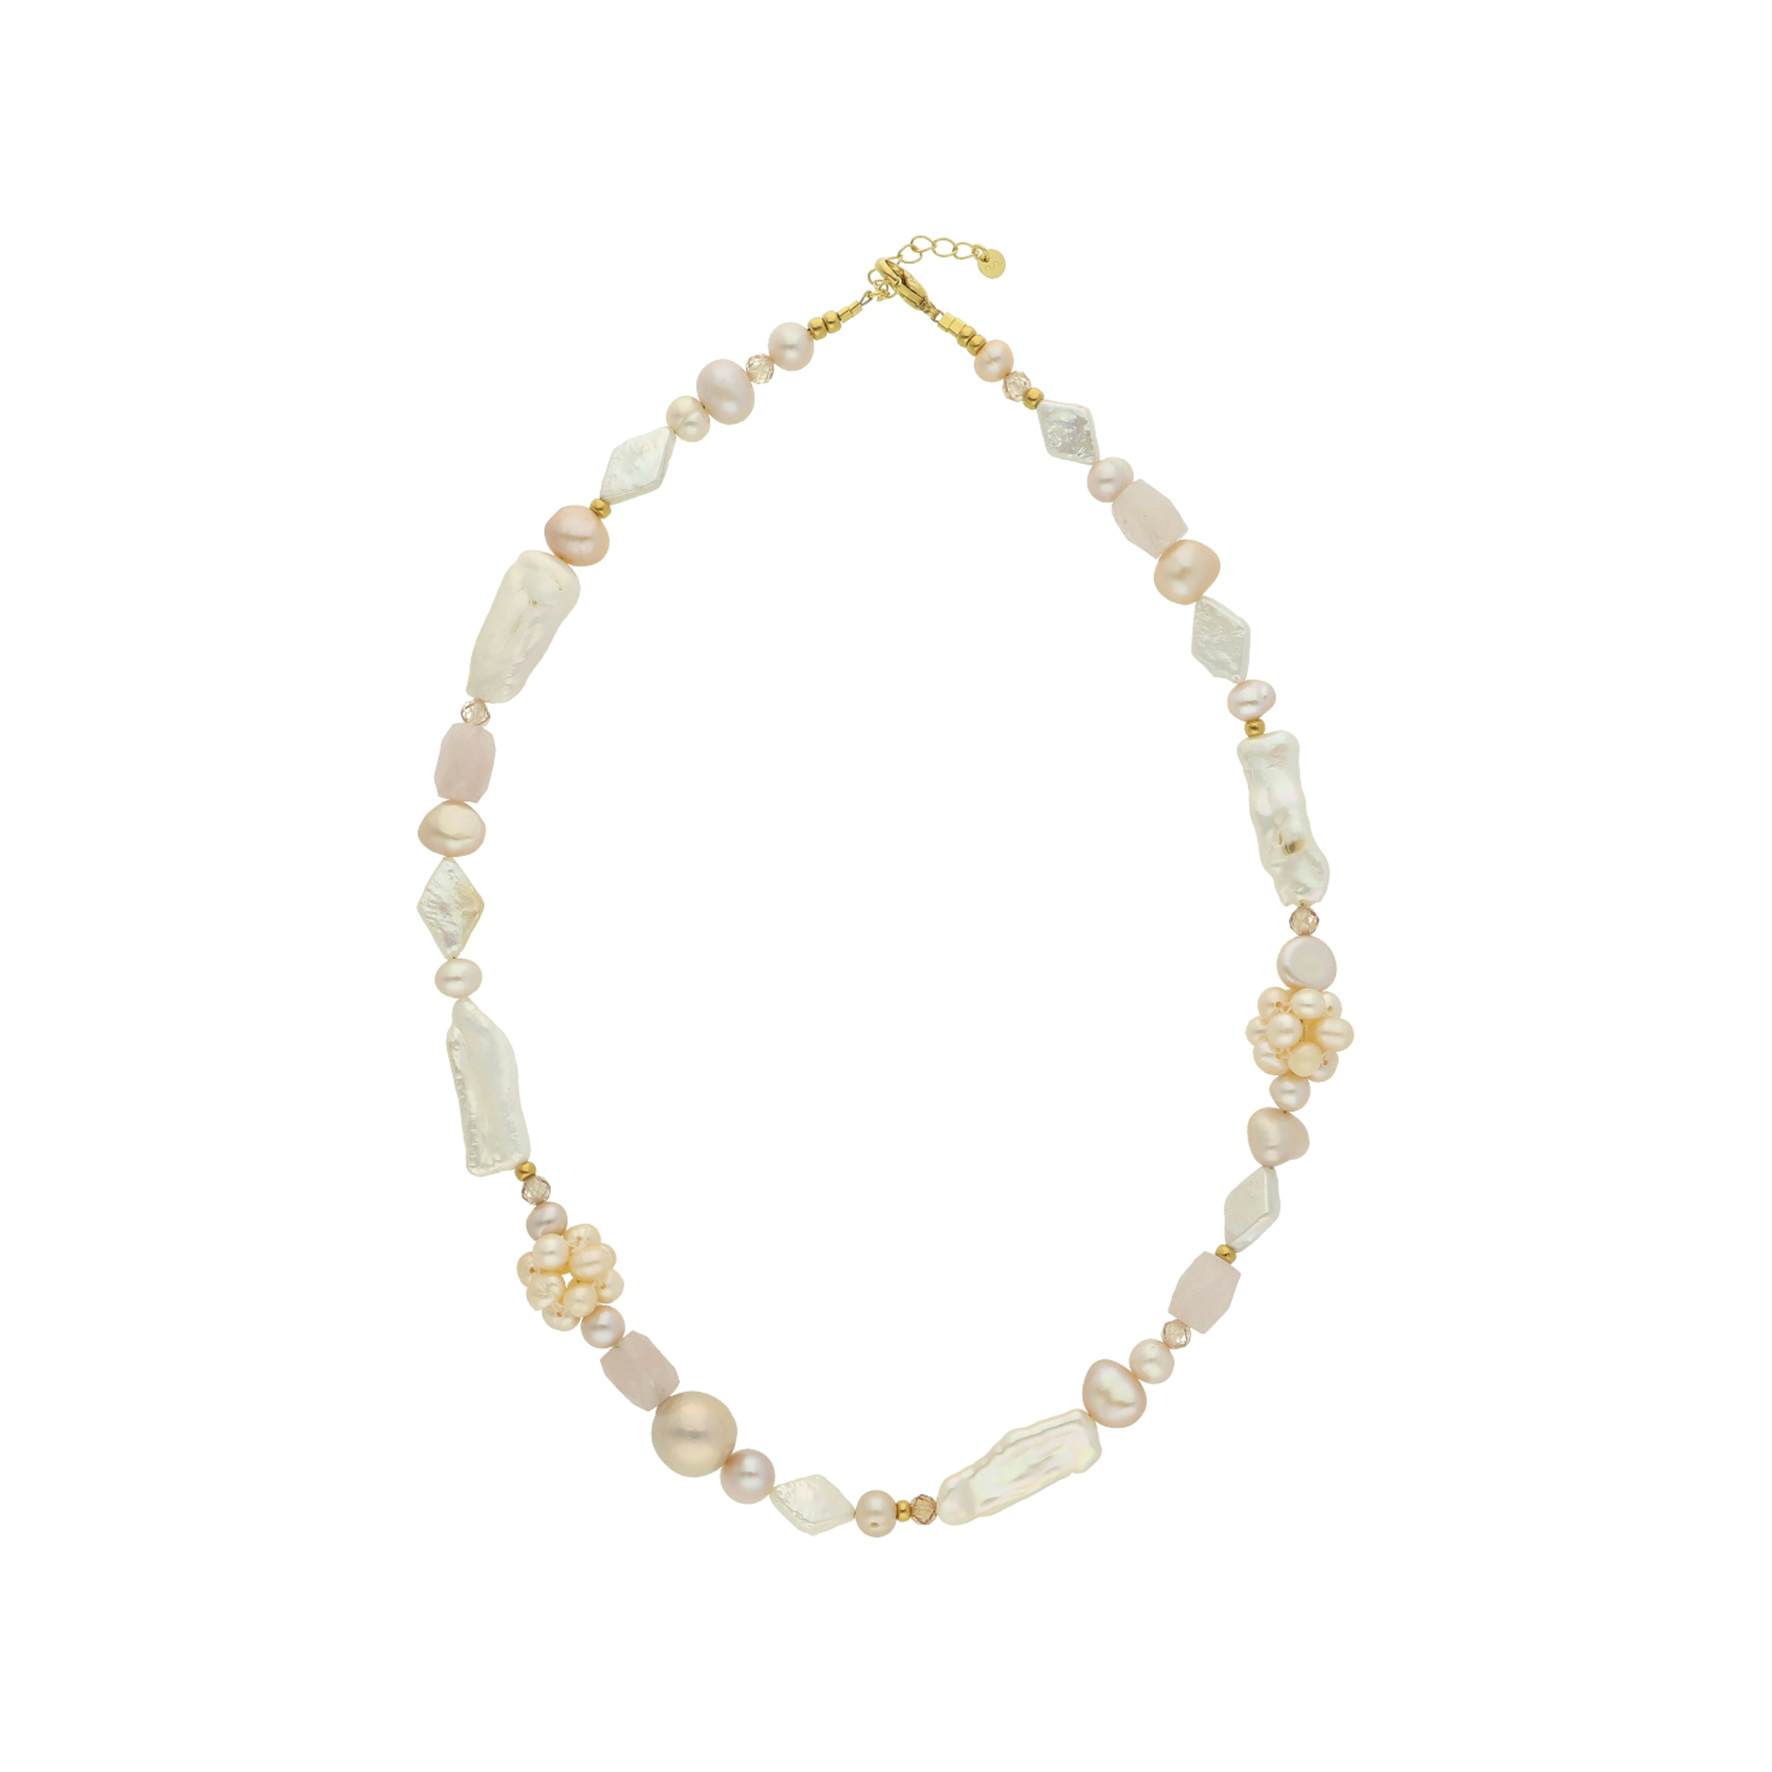 Diana Pearl Necklace from Nuni Copenhagen in Goldplated-Silver Sterling 925